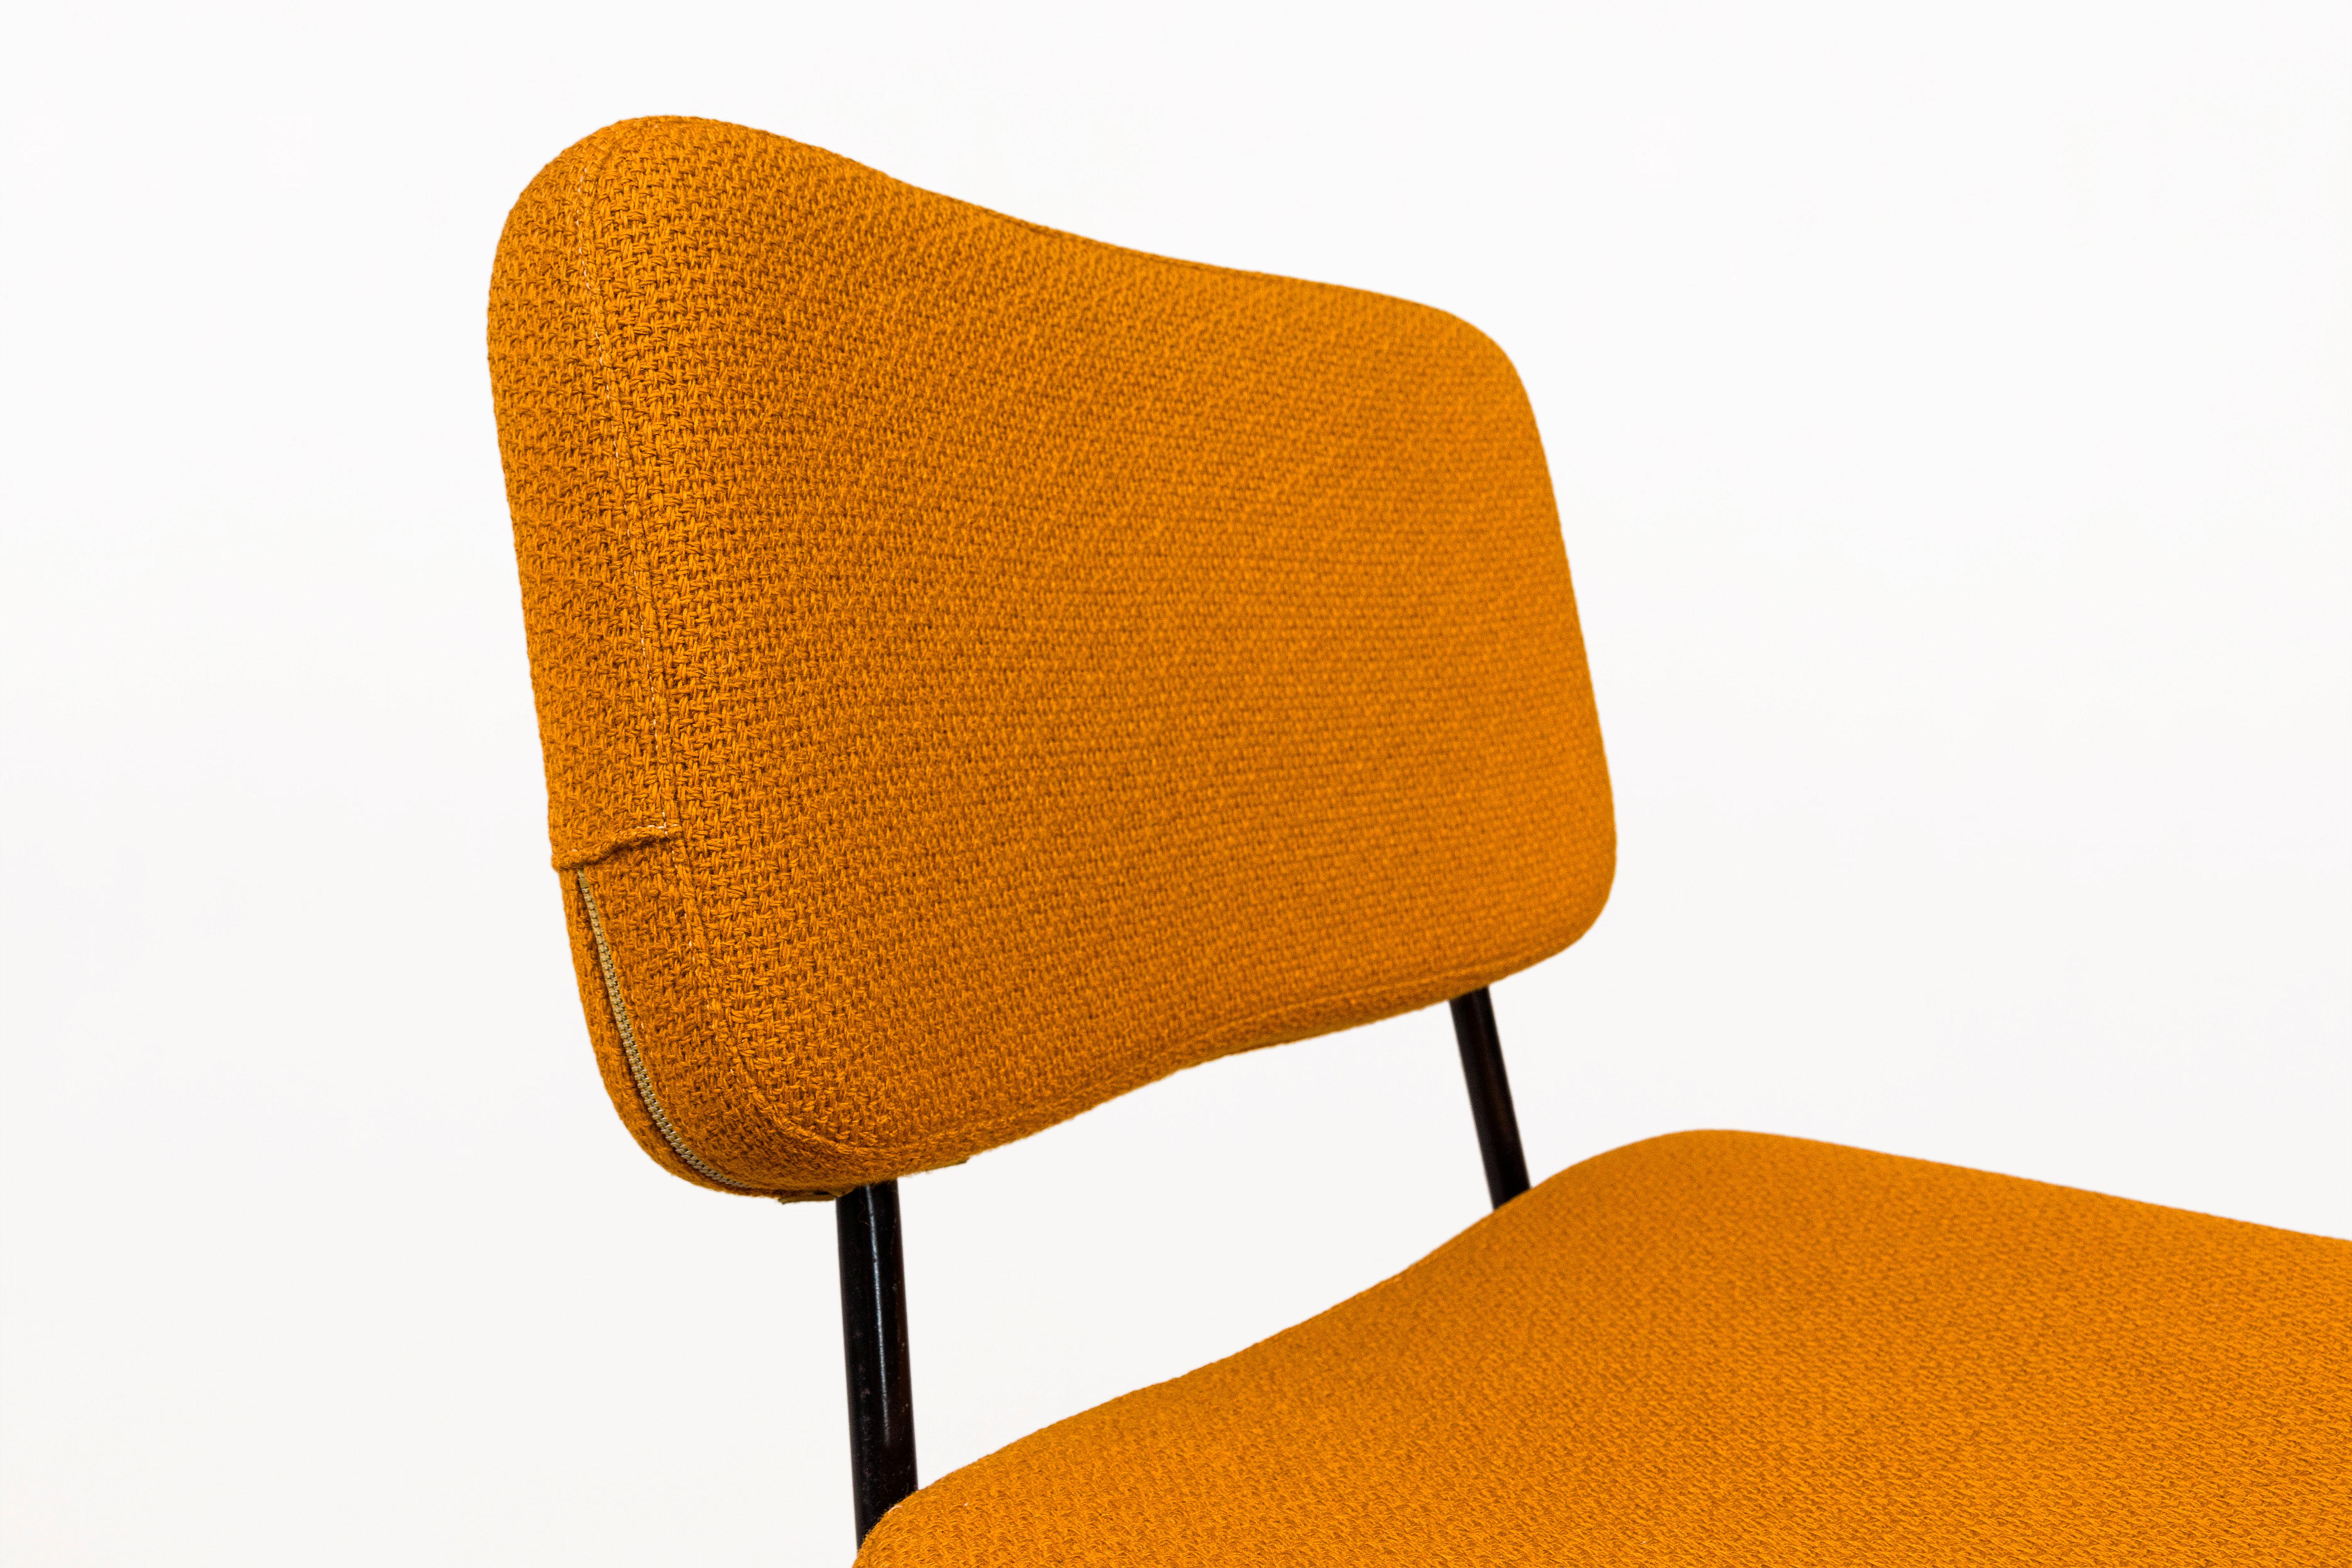 Set of 4 André Simard for Airborne.
Metal structure and orange upholstery,
circa 1955, France.
Good vintage condition.
André Simard is a French artist born in 1926.
Airborne is one of France's most successful and influential design companies of